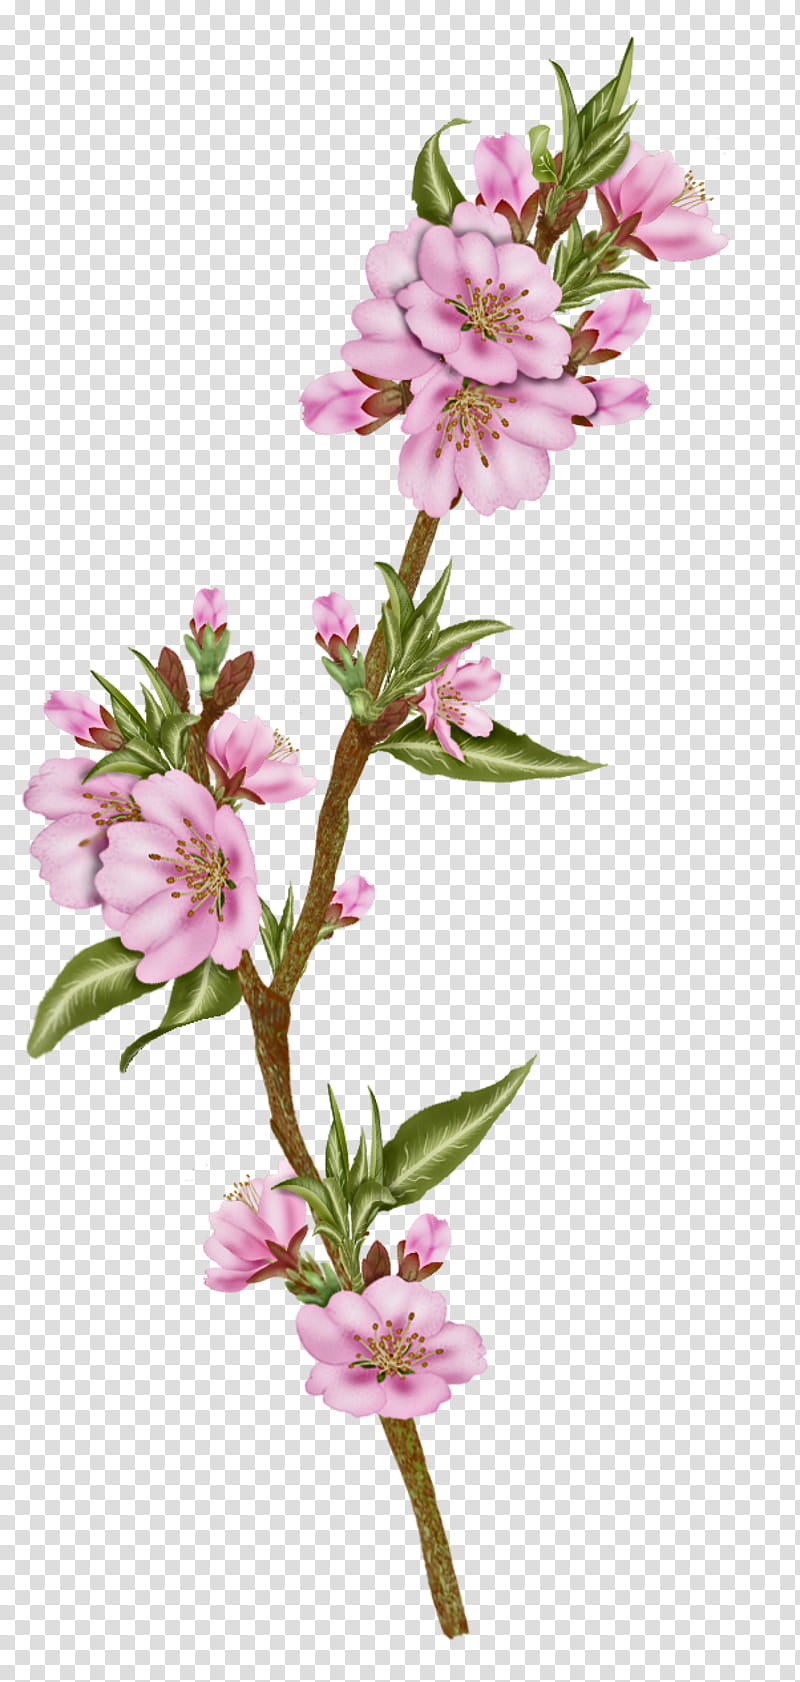 Watercolor Pink Flowers, Floral Design, Flower Bouquet, Cut Flowers, Lily, Blossom, Almond, Lily Of The Incas transparent background PNG clipart